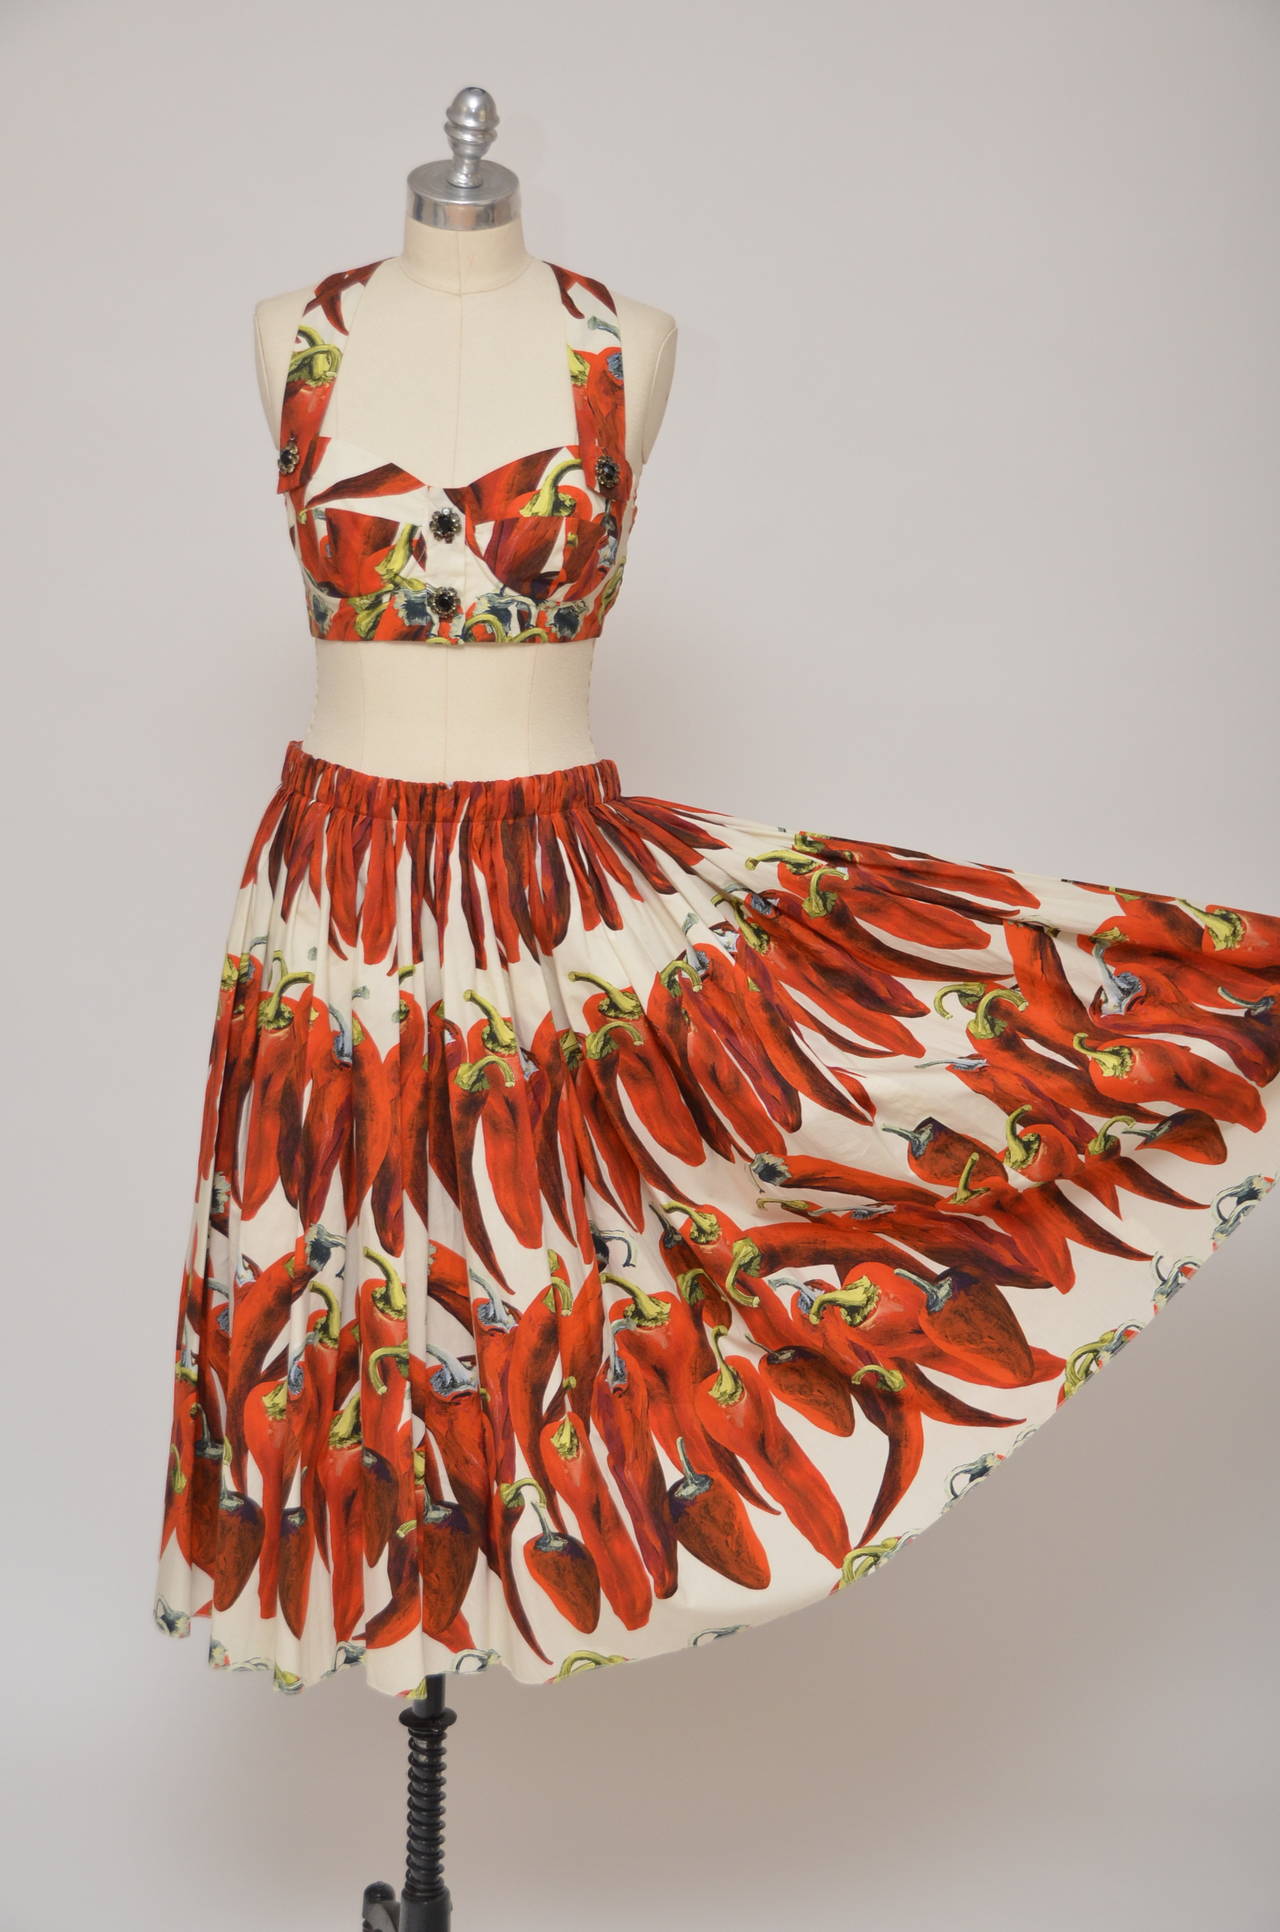 Dolce & Gabbana Chili  Peppers print set :top with matching skirt.
One of the most recognizable and popular Dolce  & Gabbana prints.
Top is size 42 IT and skirt is size 44IT.
Skirt measure:waist 15.25